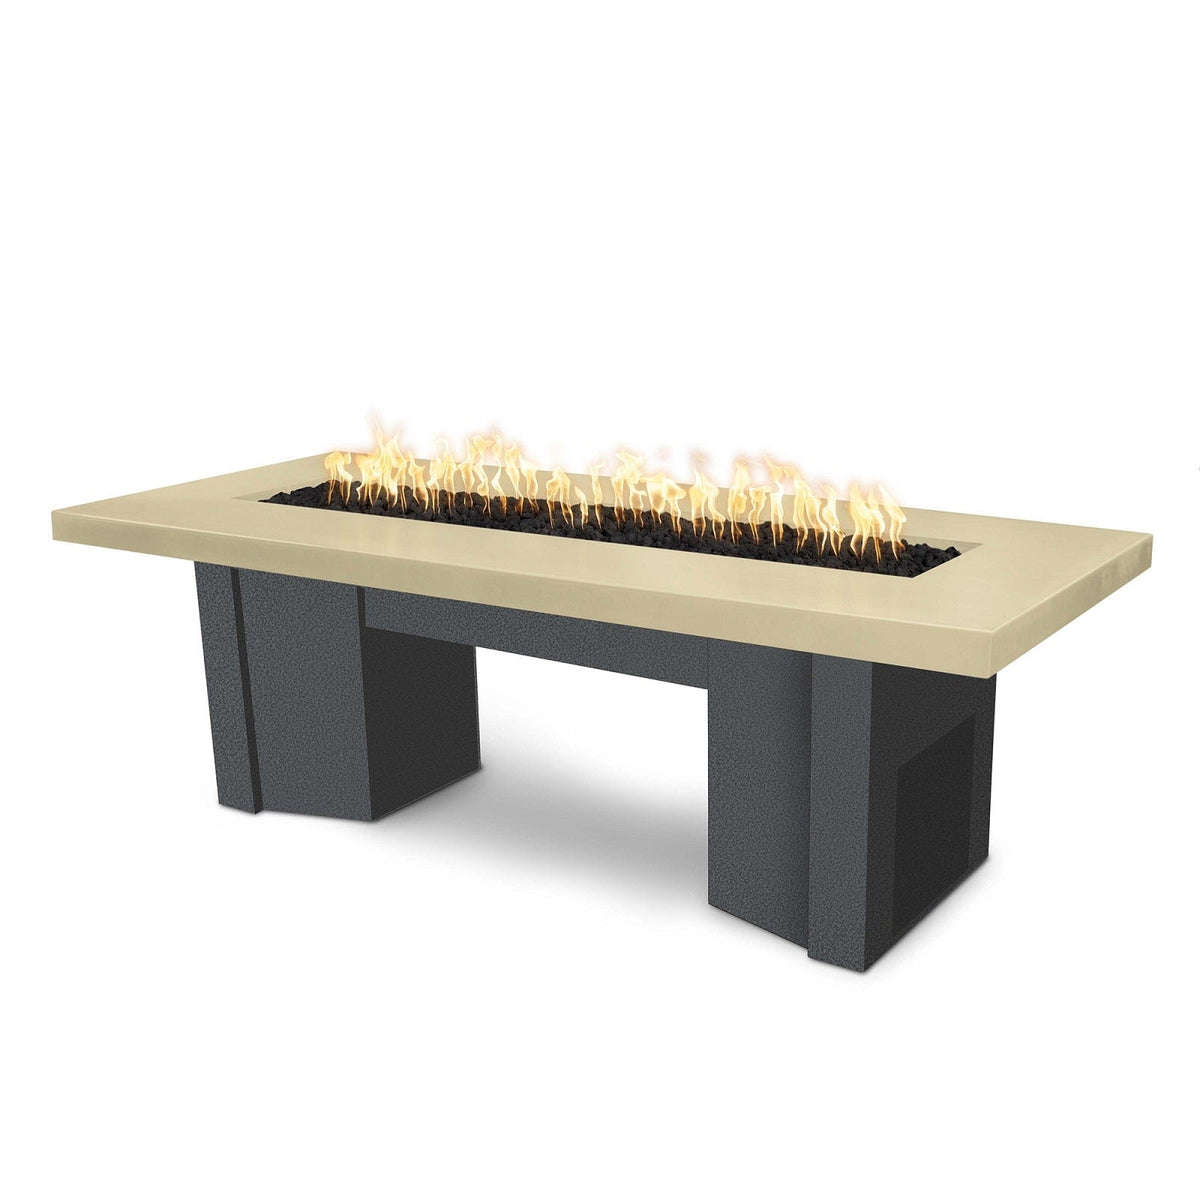 The Outdoor Plus Fire Features Vanilla (-VAN) / Silver Vein Powder Coated Steel (-SLV) The Outdoor Plus 60&quot; Alameda Fire Table Smooth Concrete in Liquid Propane - Match Lit with Flame Sense System / OPT-ALMGFRC60FSML-LP